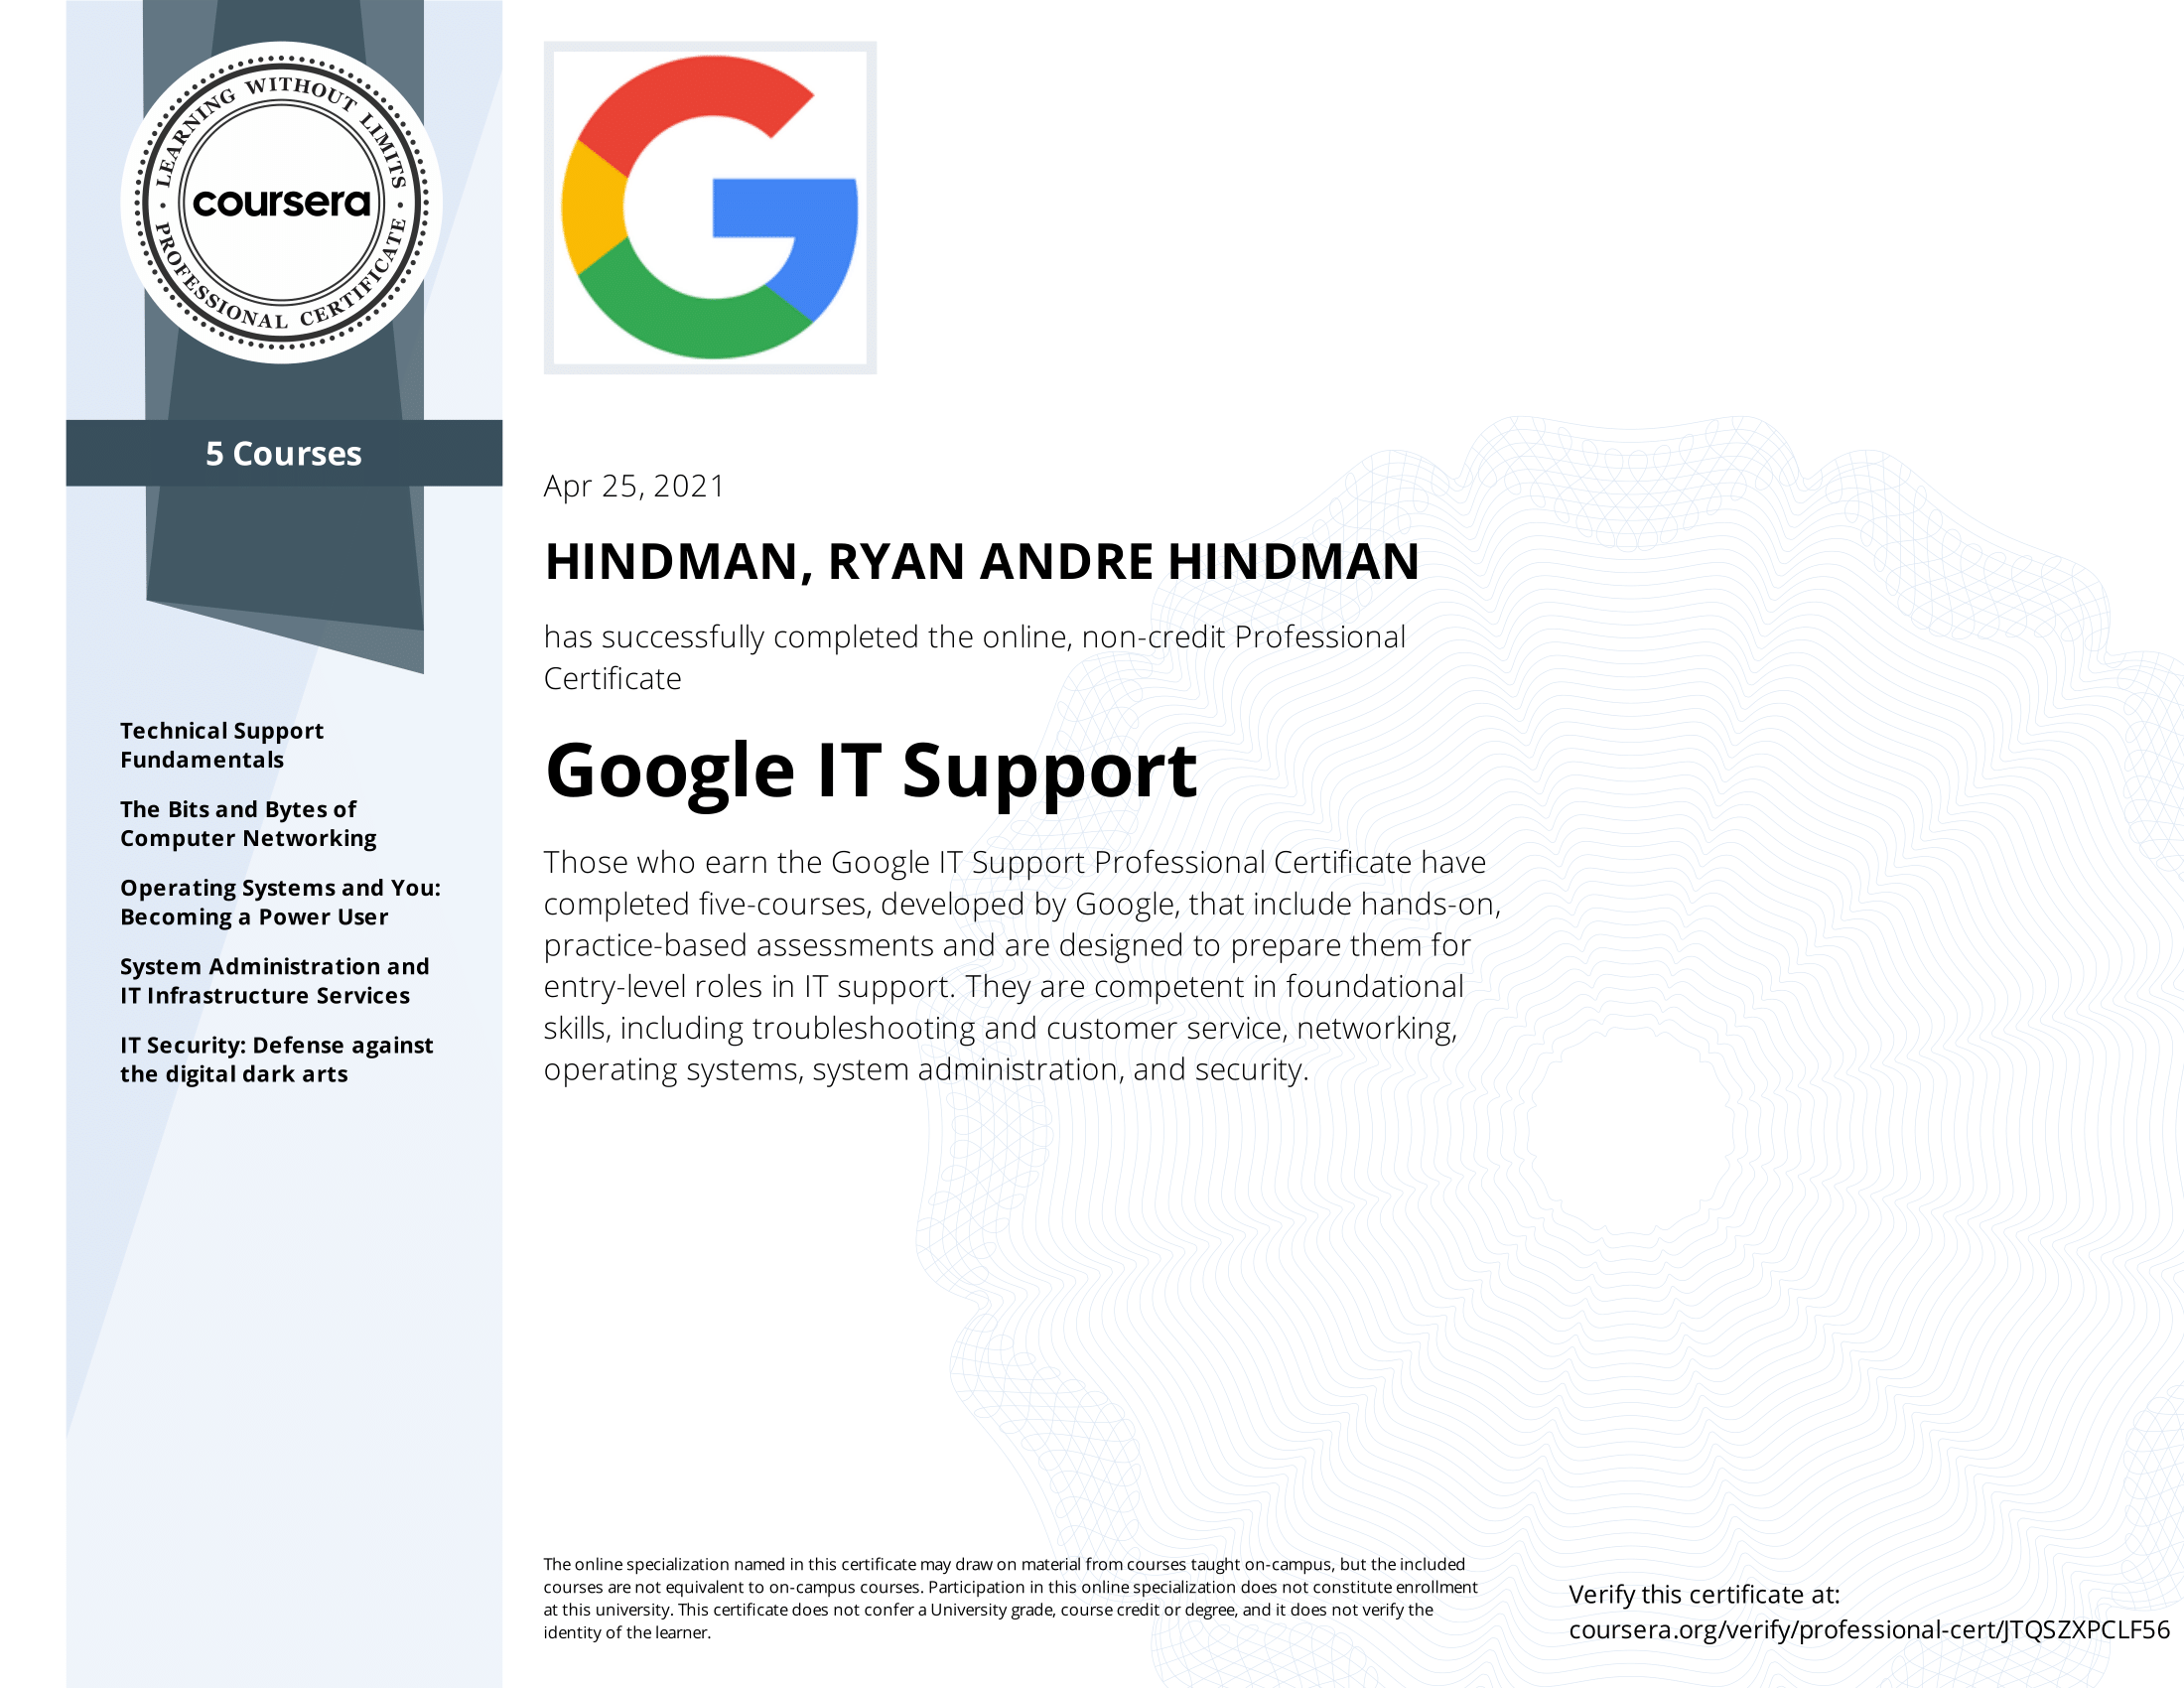 Google IT Support